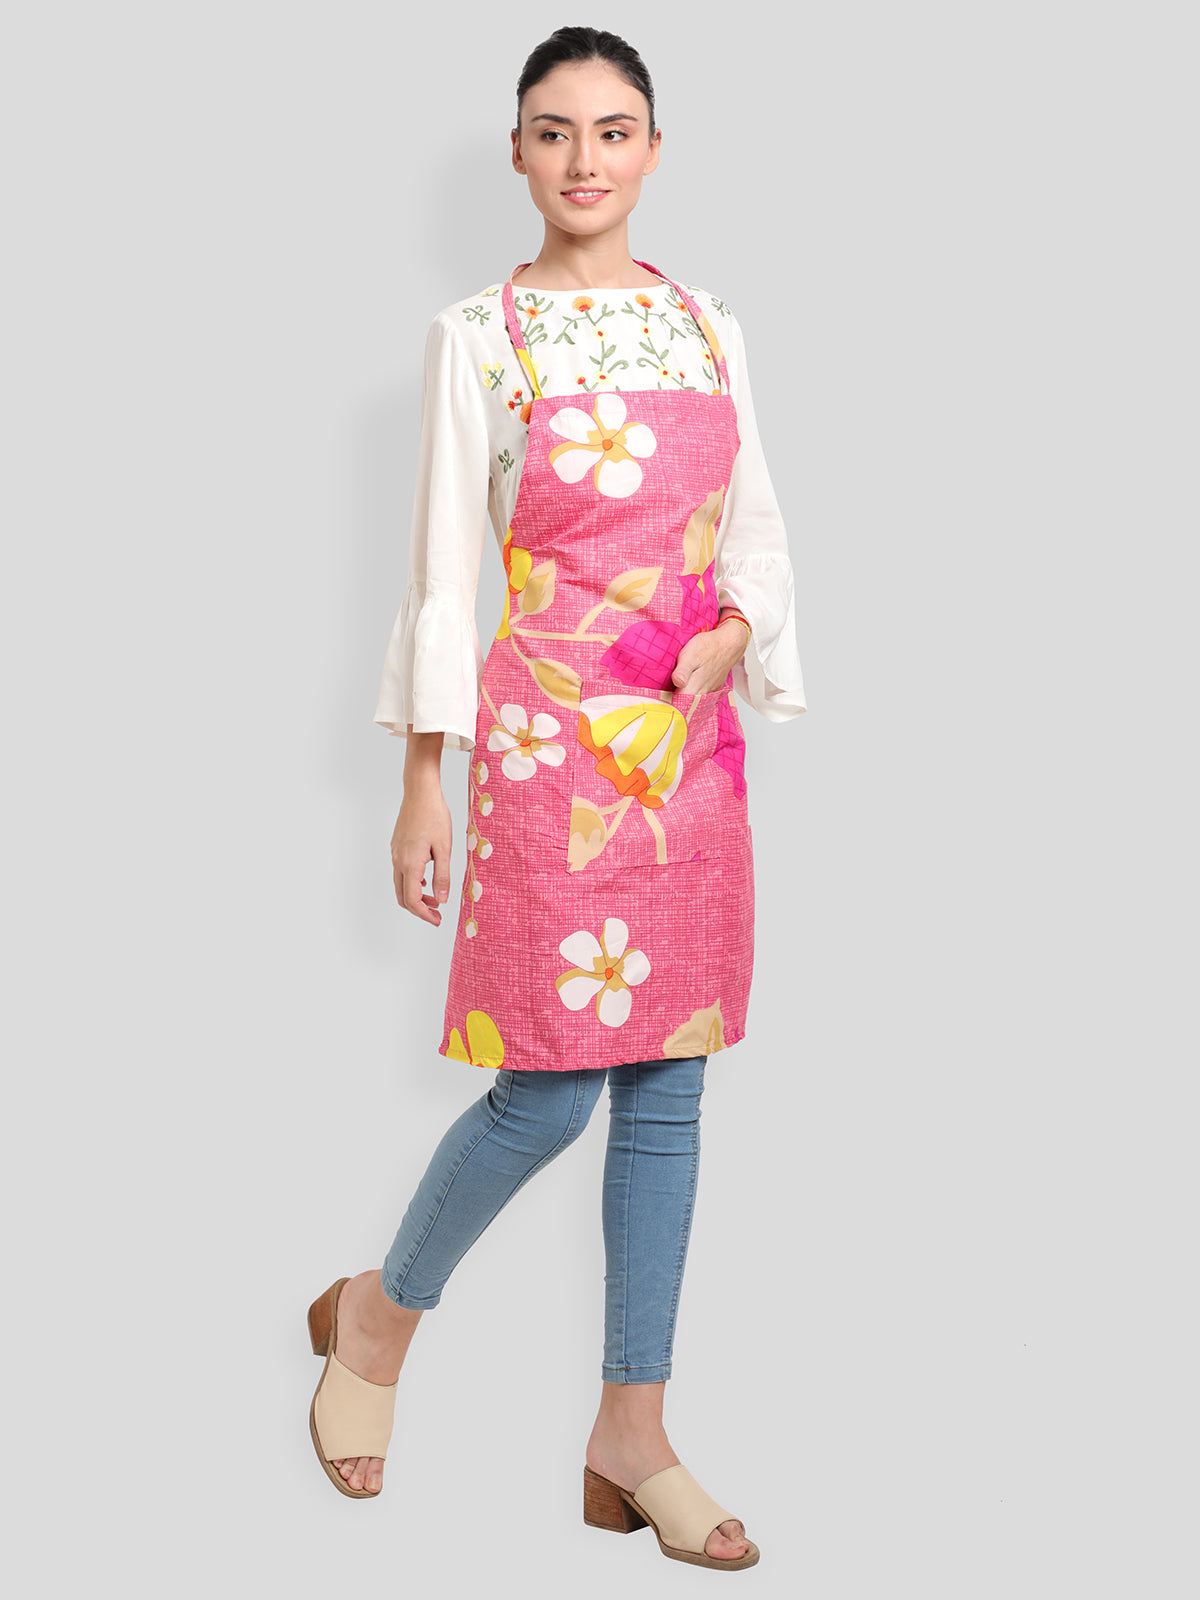 Pink Cotton Floral Patterned Kitchen Apron with Napkin